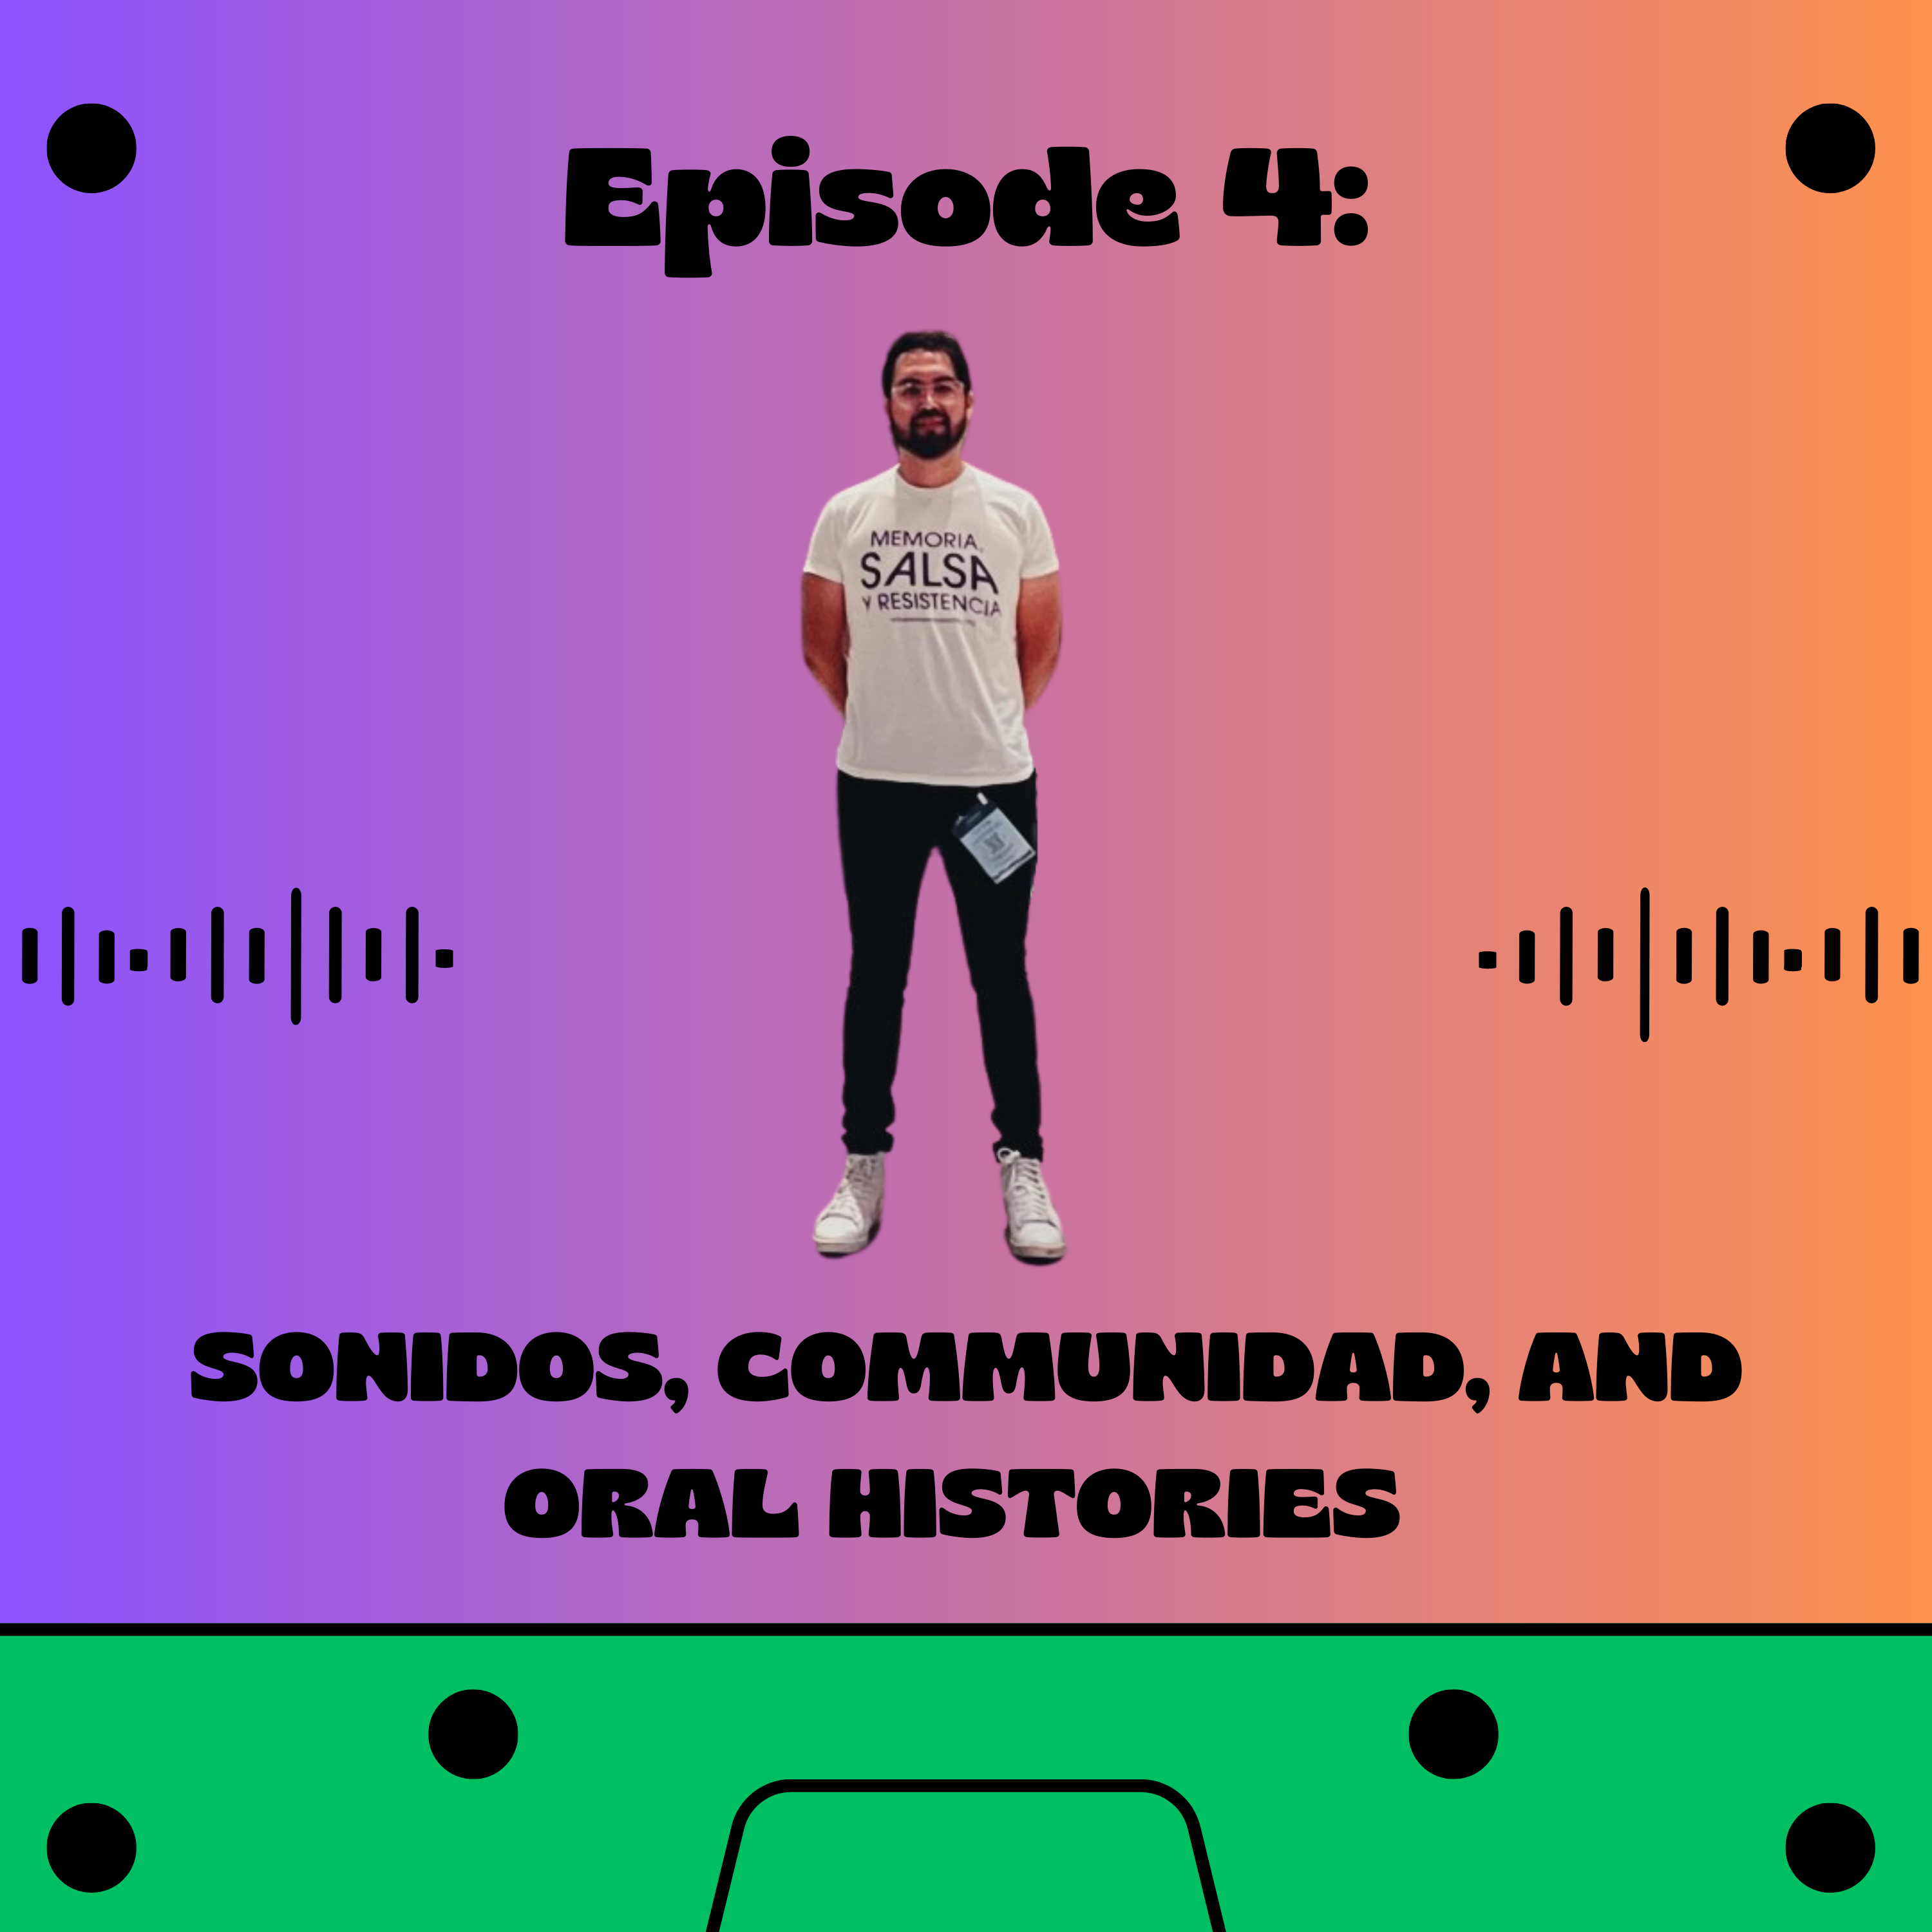 The cover for Episode 4 of the Oíste? Podcast series. The text on the photo reads Oíste? Podcast Ritmos, Comunidad, and Oral Histories. There is a picture of a man standing with a white shirt on and jeans.